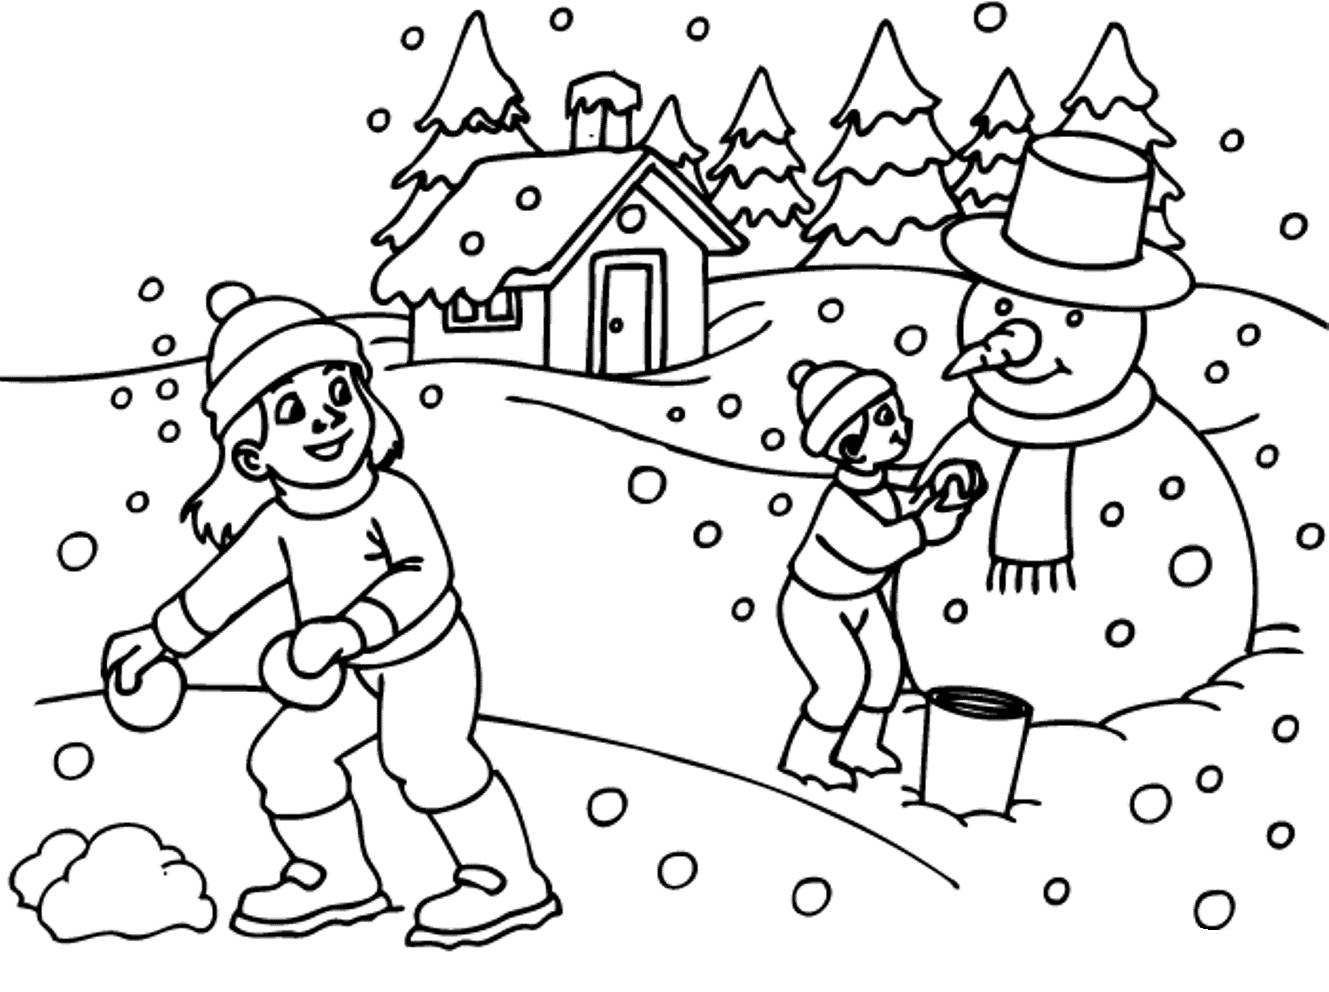 Snow Scene Coloring Page at Free printable colorings